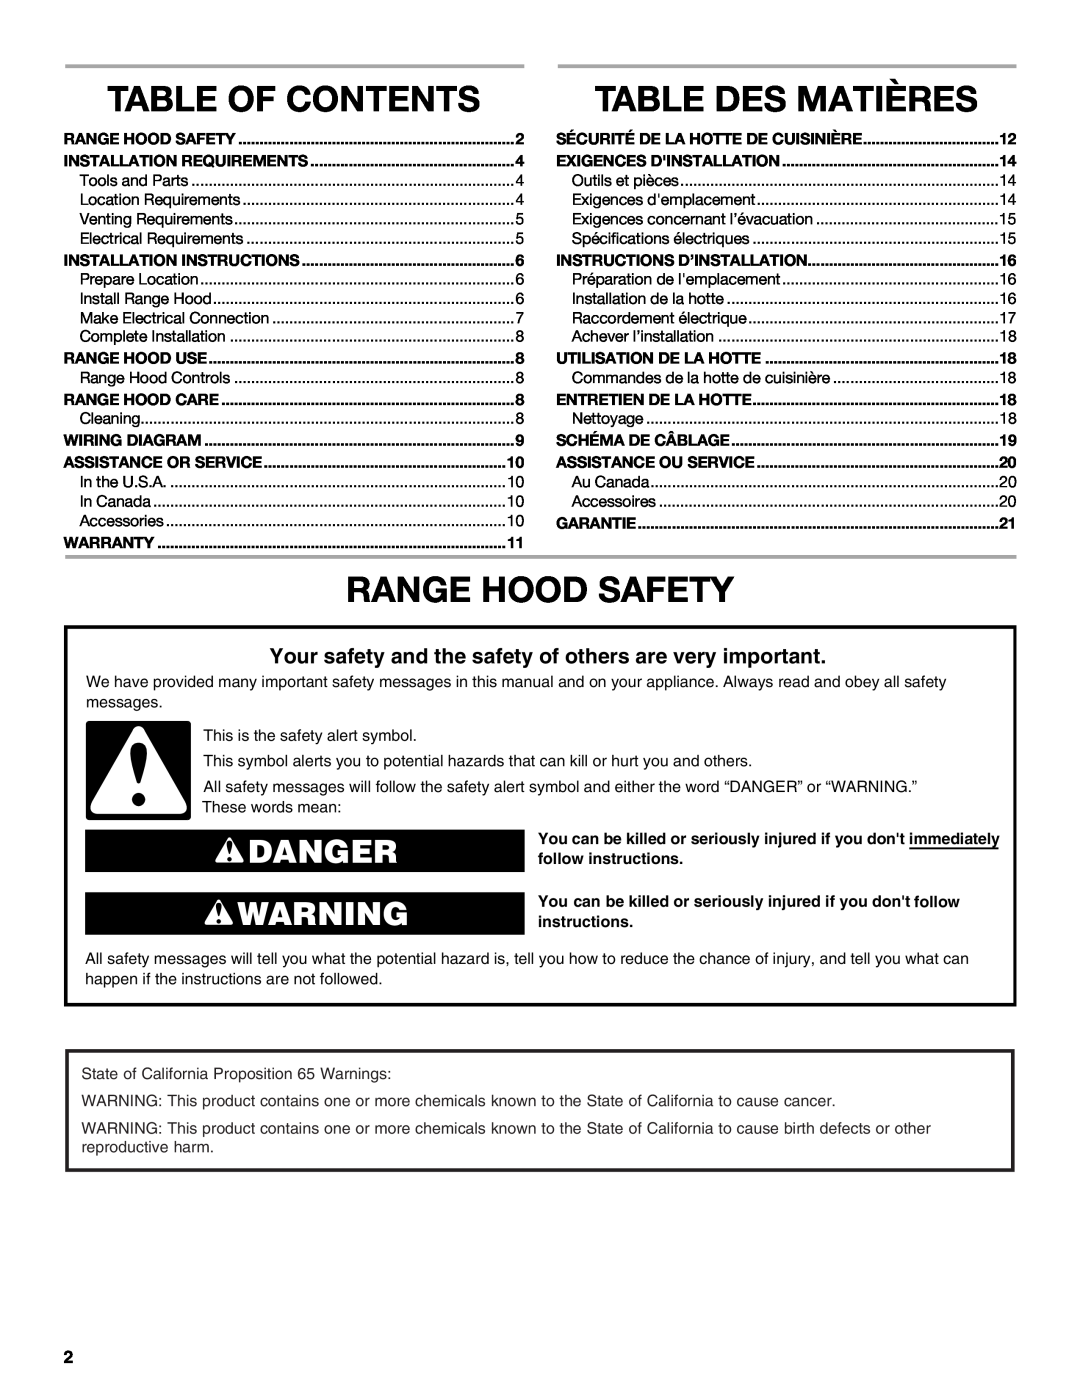 Whirlpool UXT4030AY, UXT4036AY installation instructions Table Of Contents, Table Des Matières, Range Hood Safety, Danger 